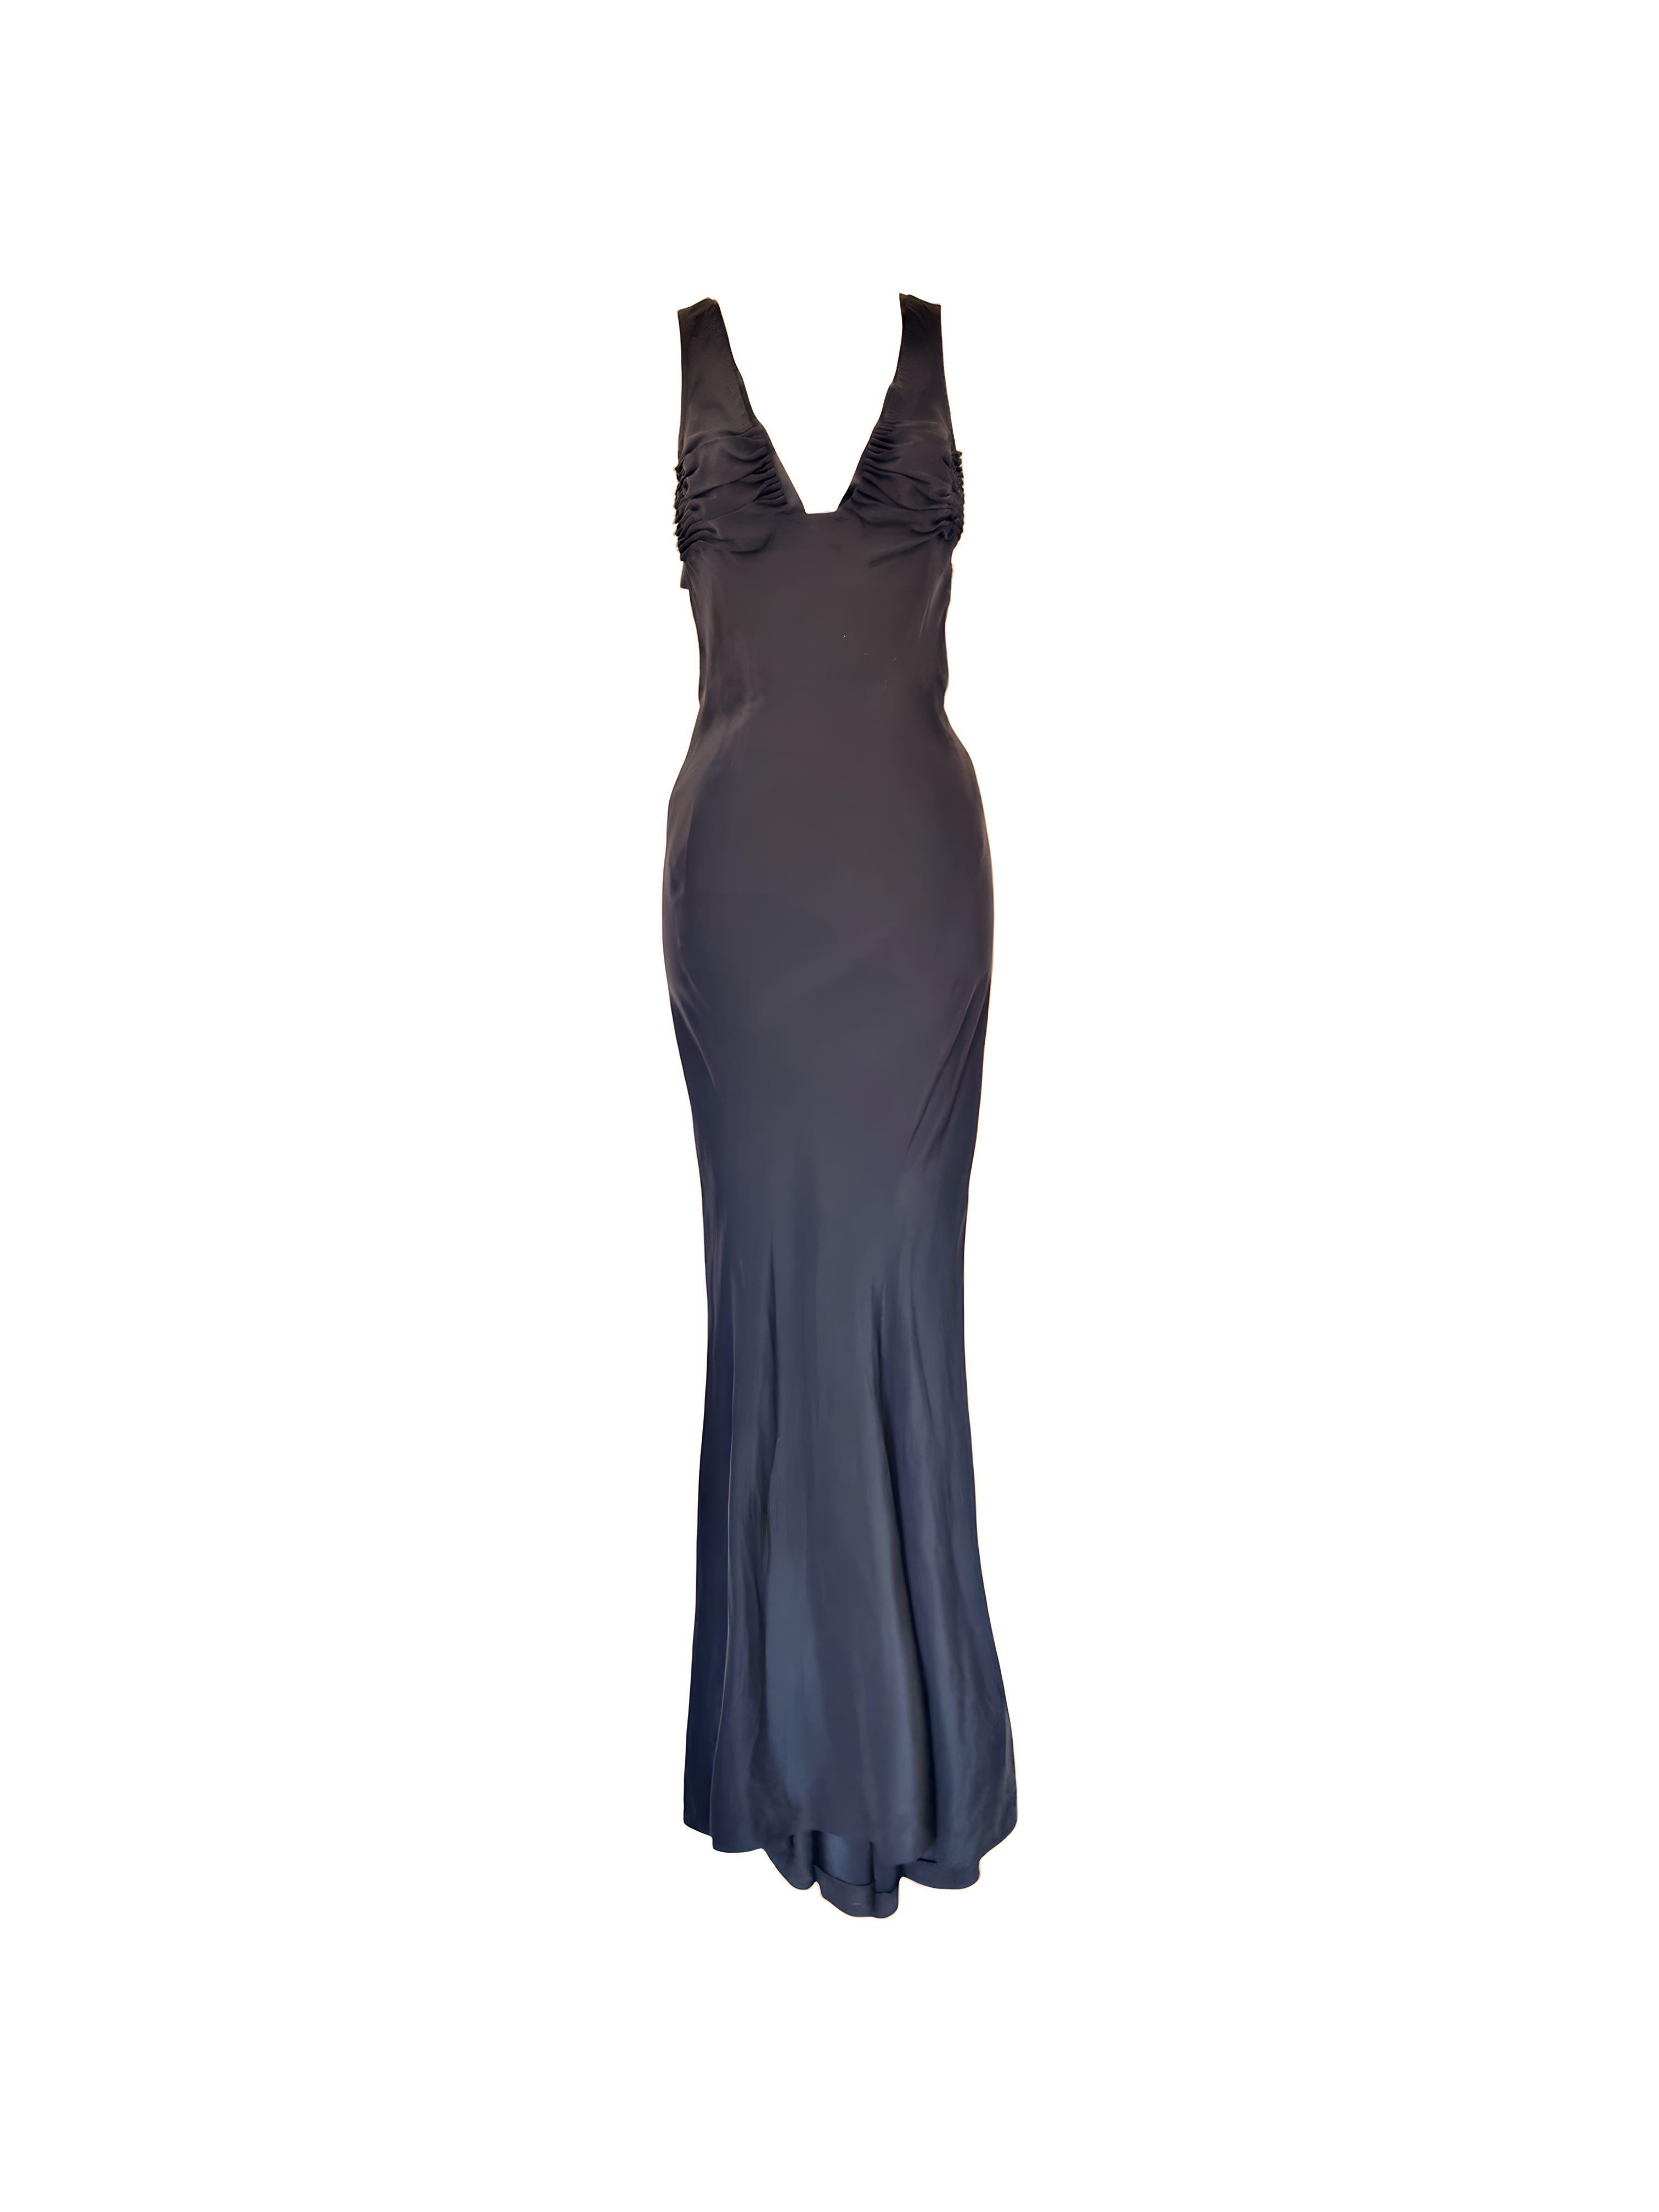 YSL by Tom Ford silk ribbon gown, FW 2003 For Sale 1